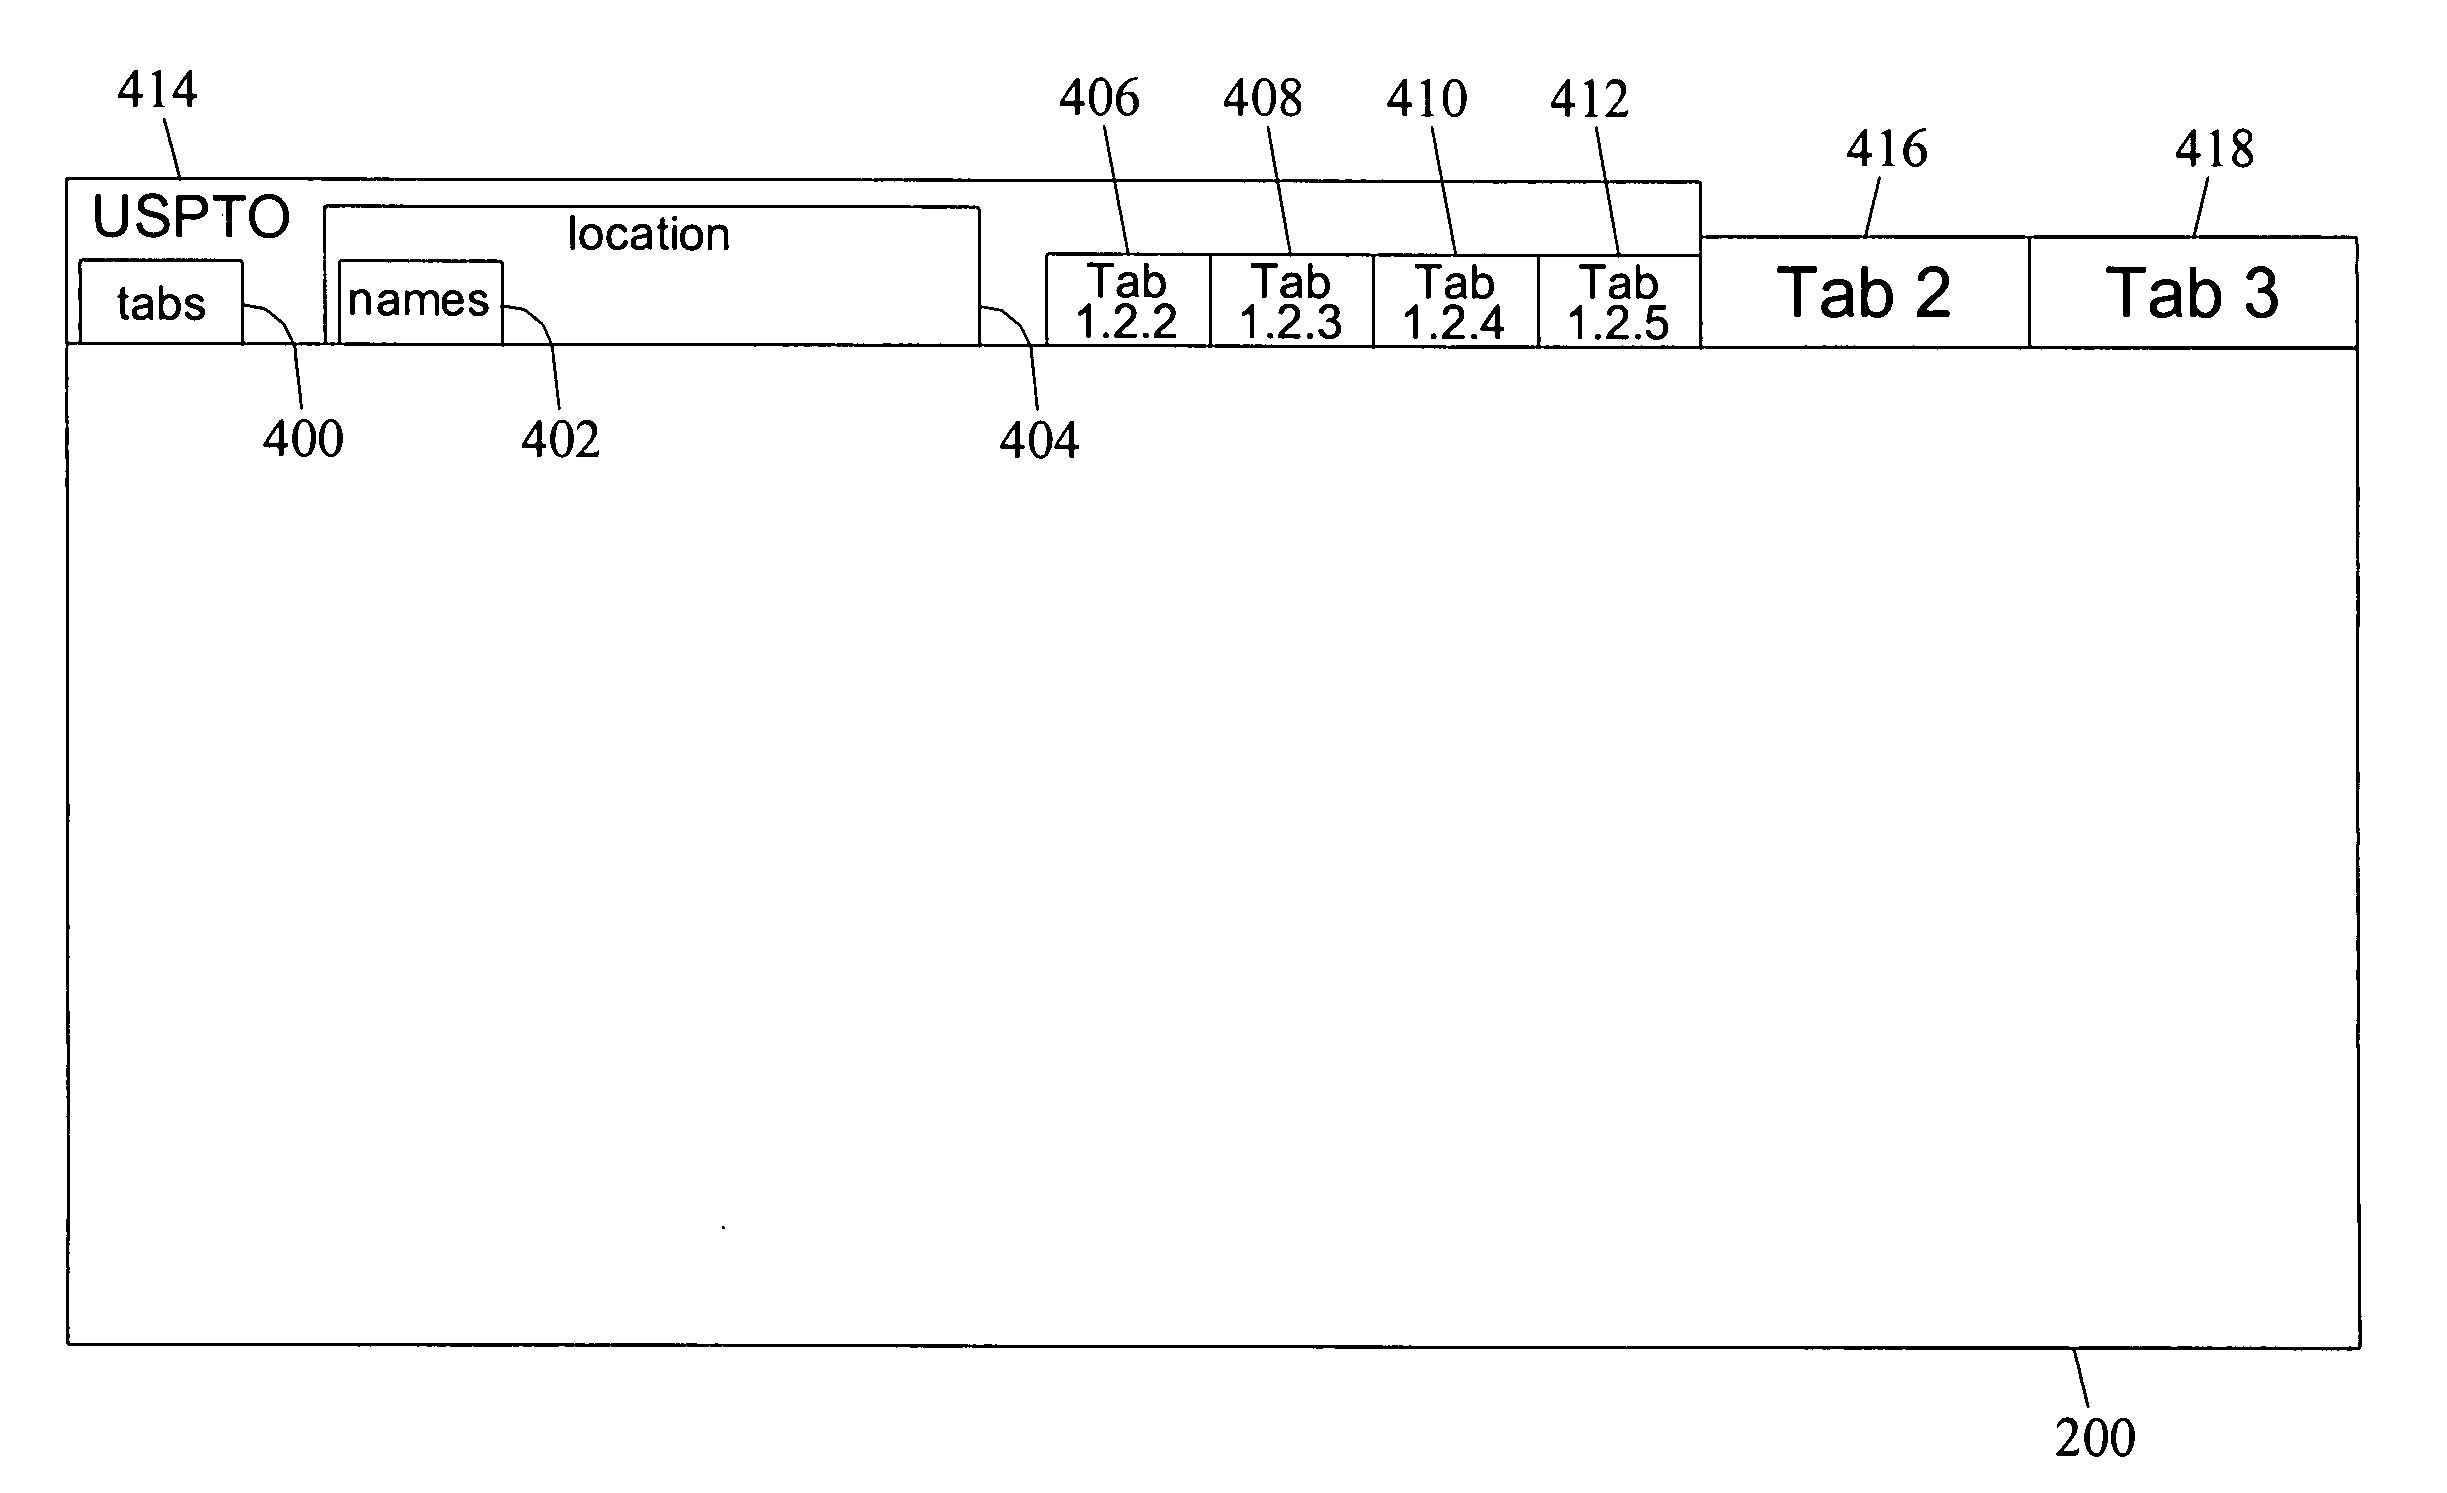 Methods, systems, and computer program products for grouping tabbed portion of a display object based on content relationships and user interaction levels